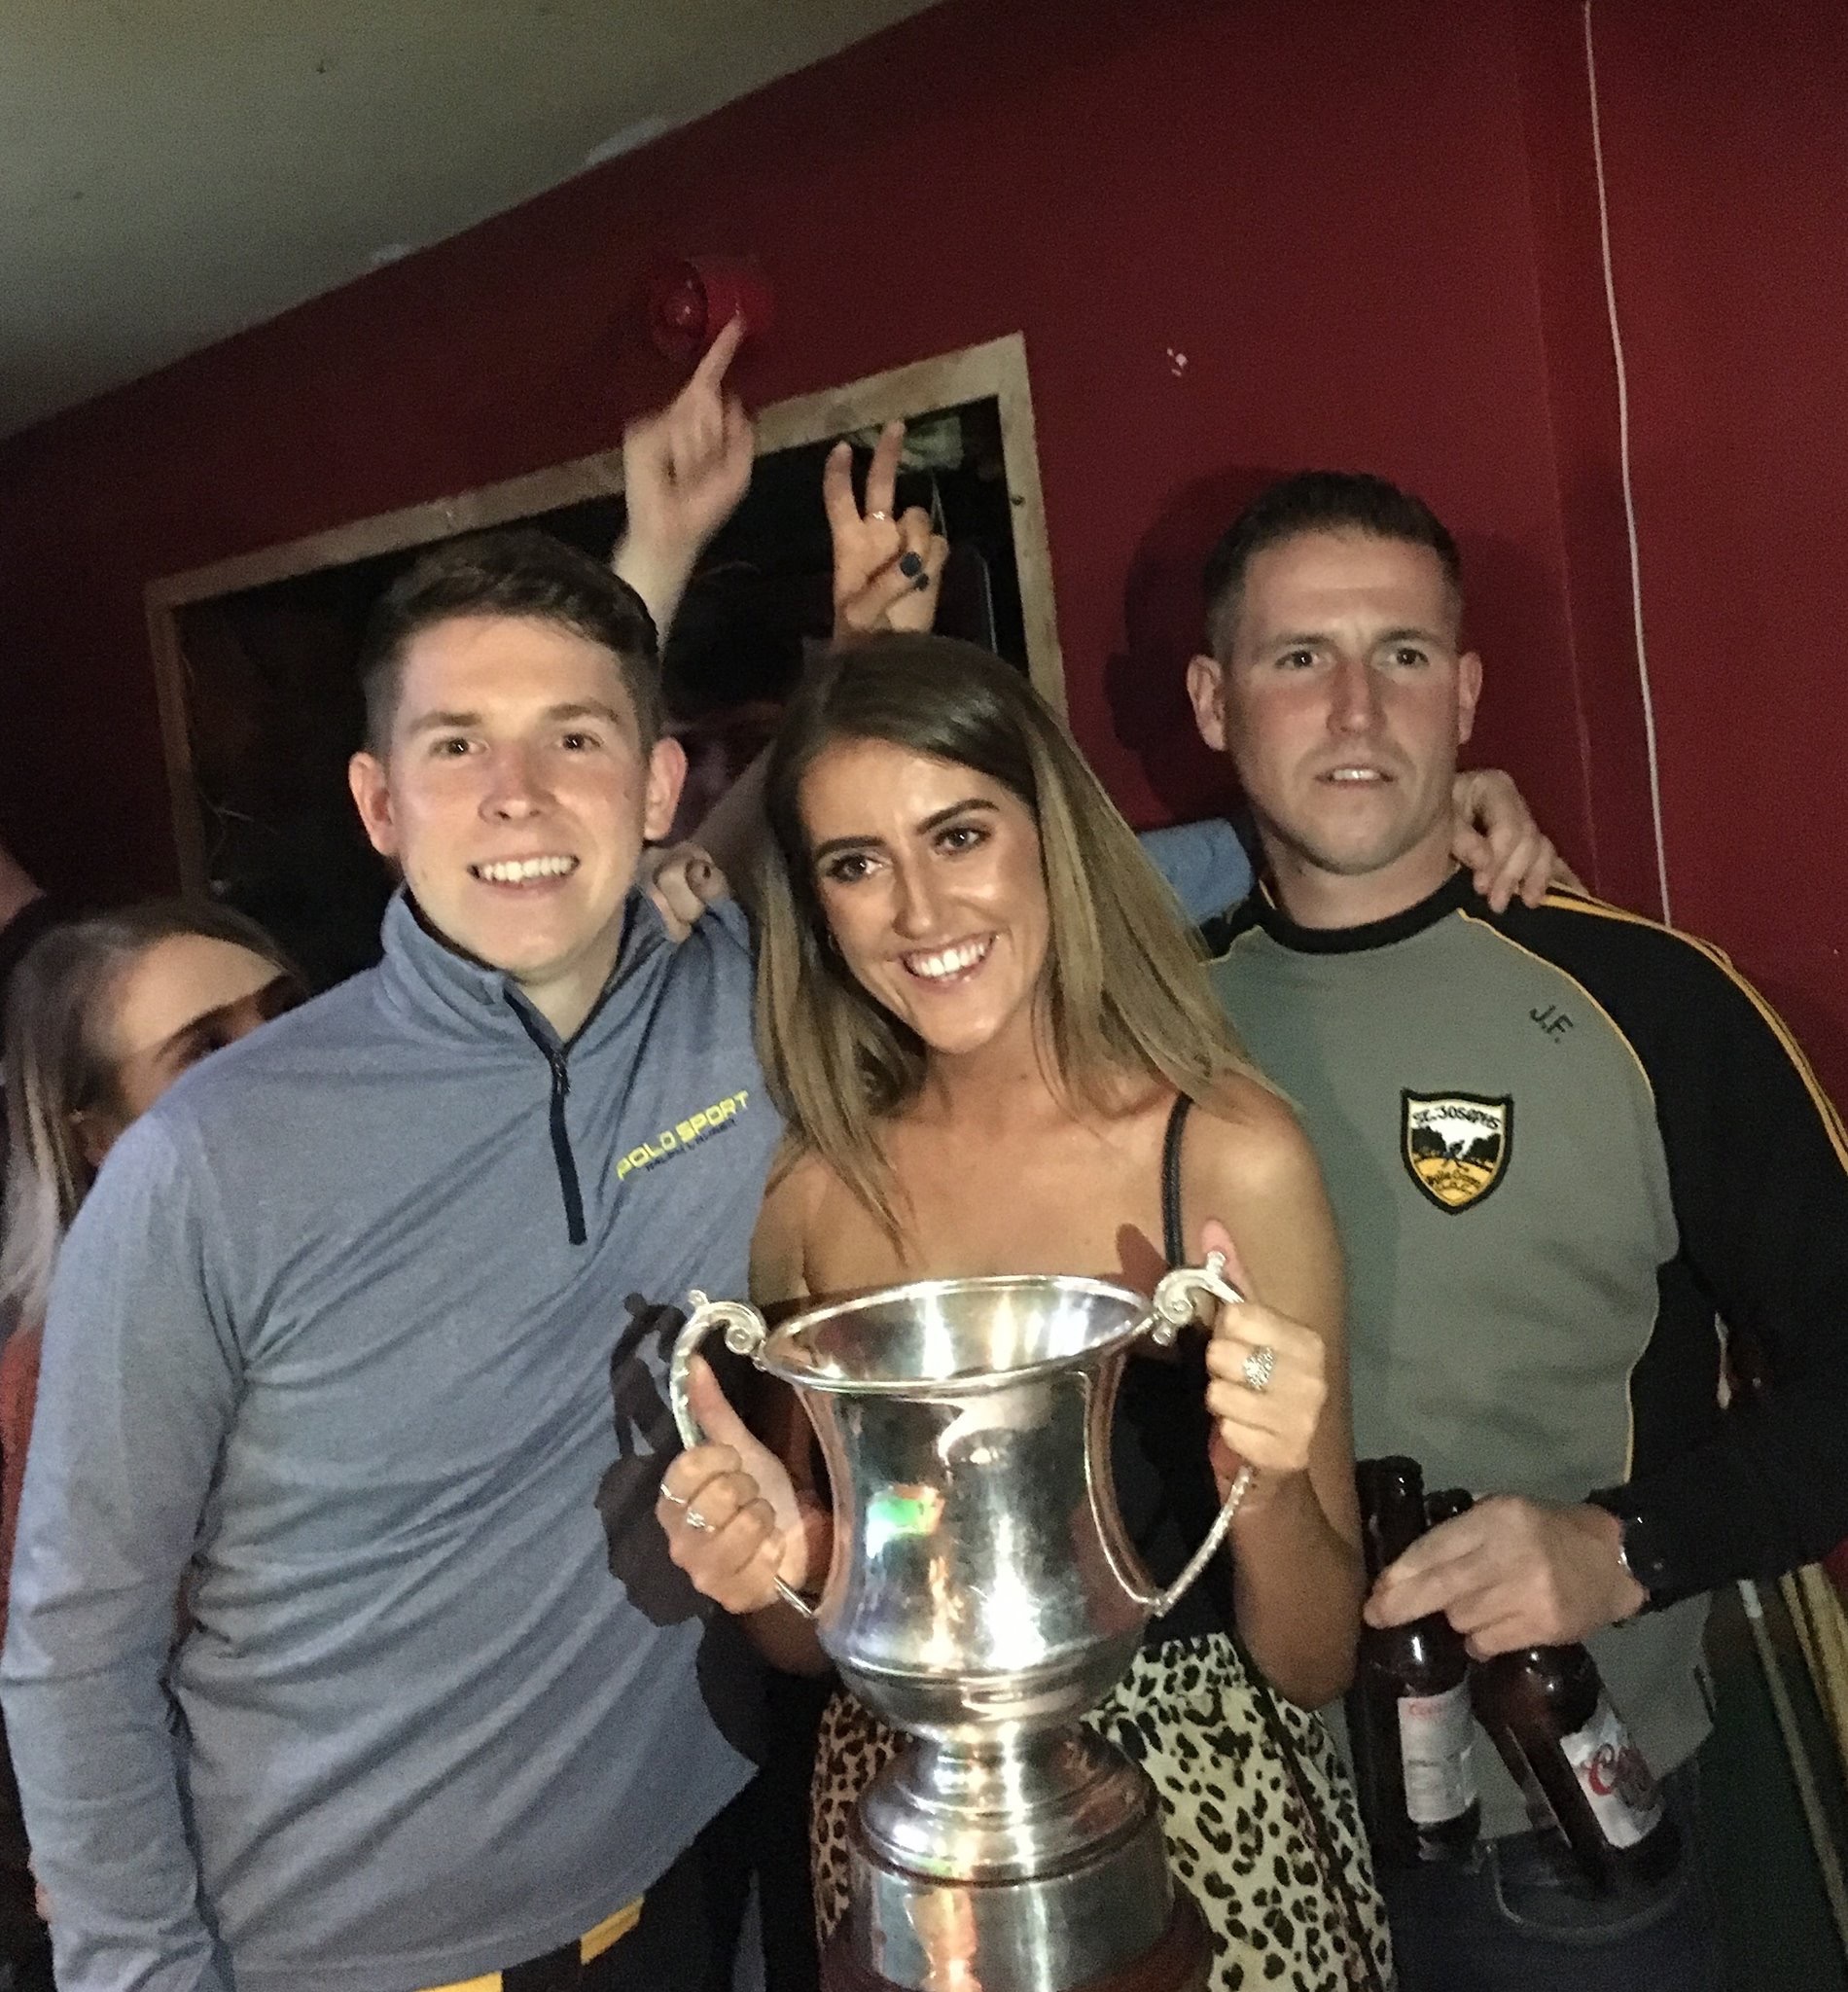 Ballycran’s Clíona Fowler talks about her new life away from Glastry